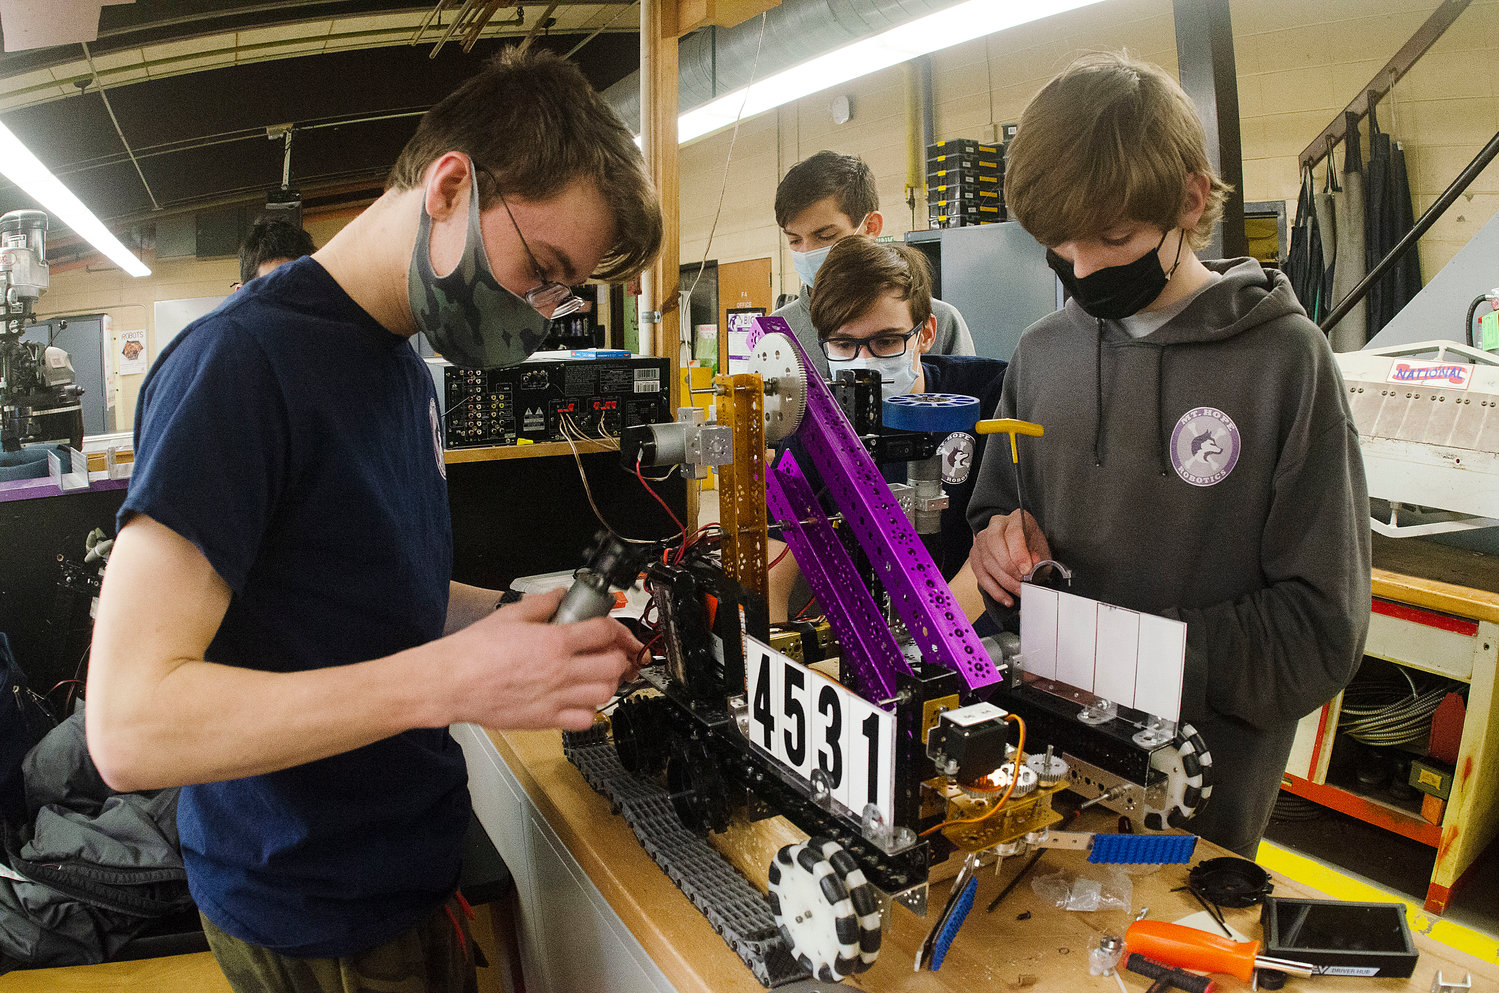 Declan Reed (left) and Michael Thibault repair their team's robot.